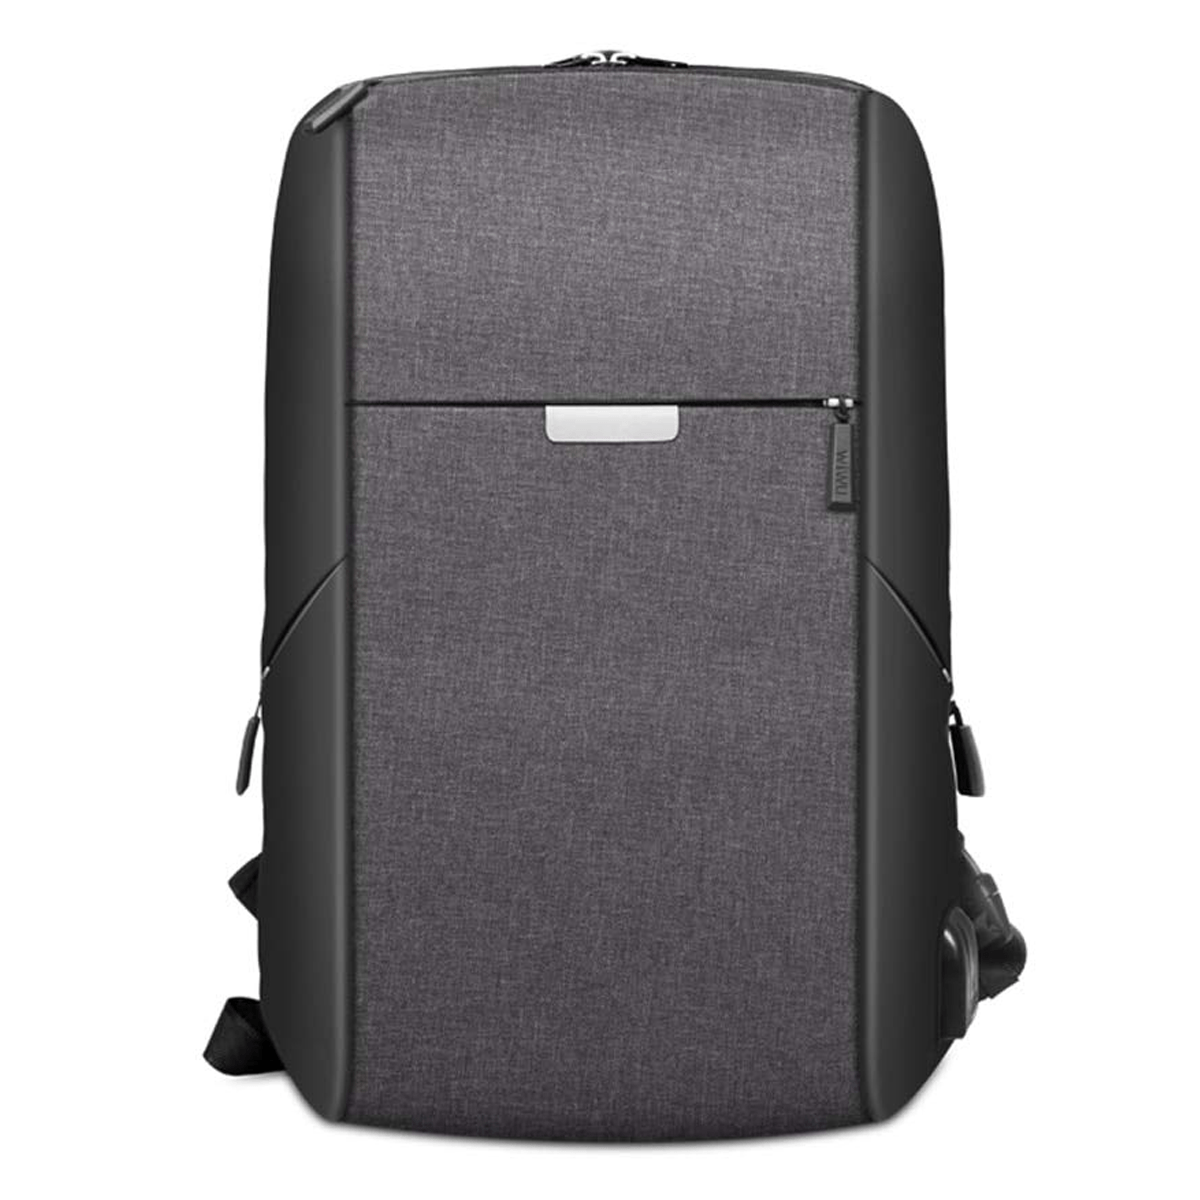 WIWU Business Laptop Backpack 15.6 inch, Anti-Theft Travel Backpack with USB Charging Port